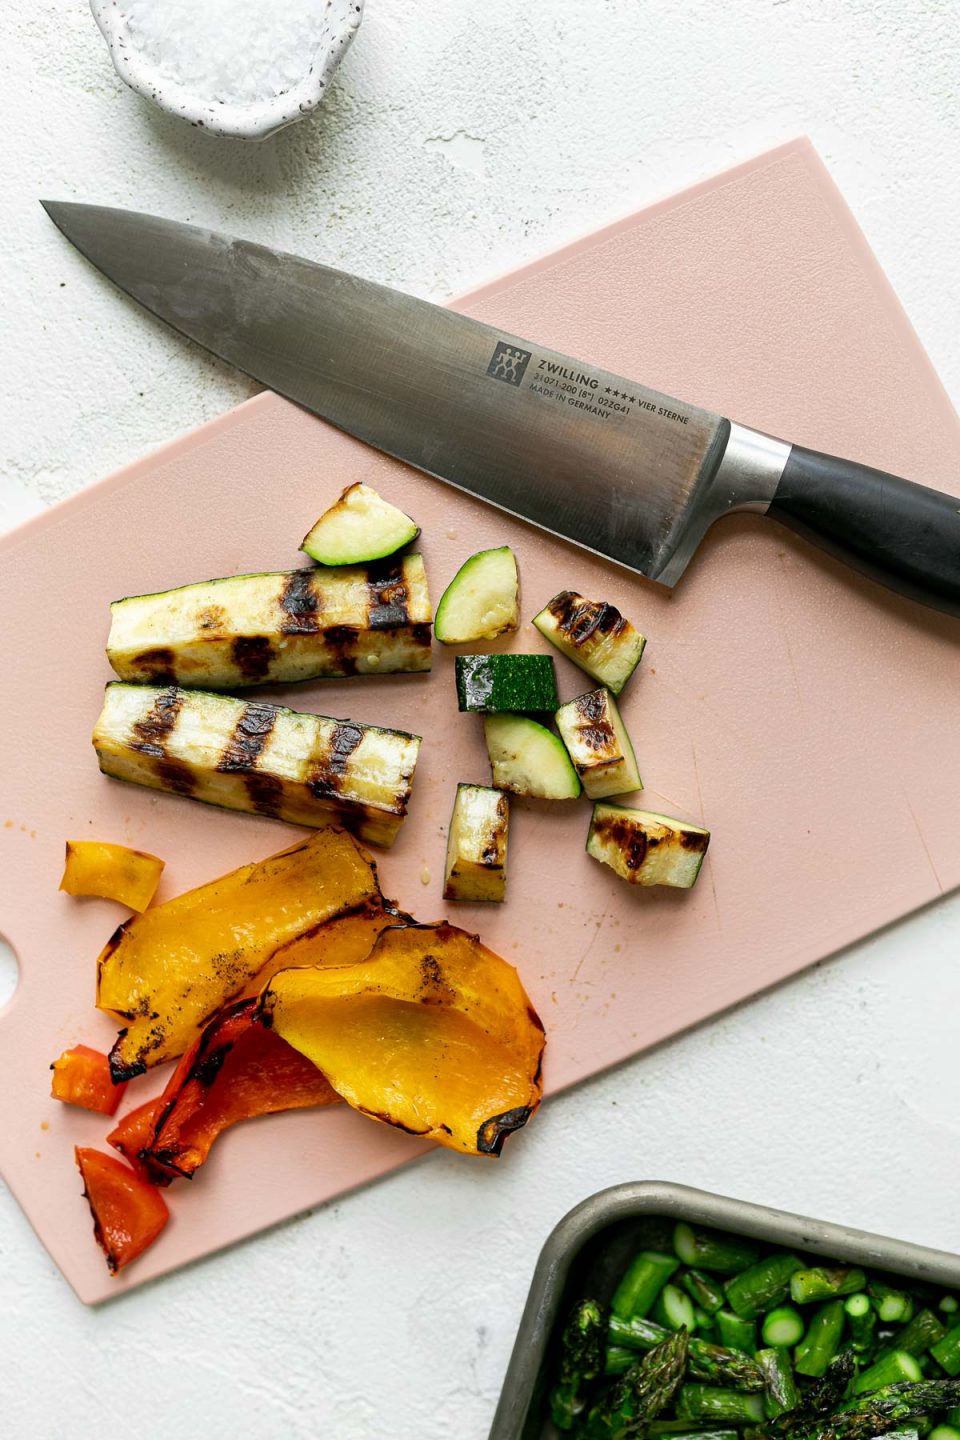 Sliced & diced grilled zucchini and bell pepper sit on top of a pink plastic cutting board a Zwilling knife used for chopping the veggies rests on top of the cutting board. The cutting board & knife sit atop a white surface. A small pinch bowl of kosher salt & a baking sheet full of grilled veggies surround the cutting board.